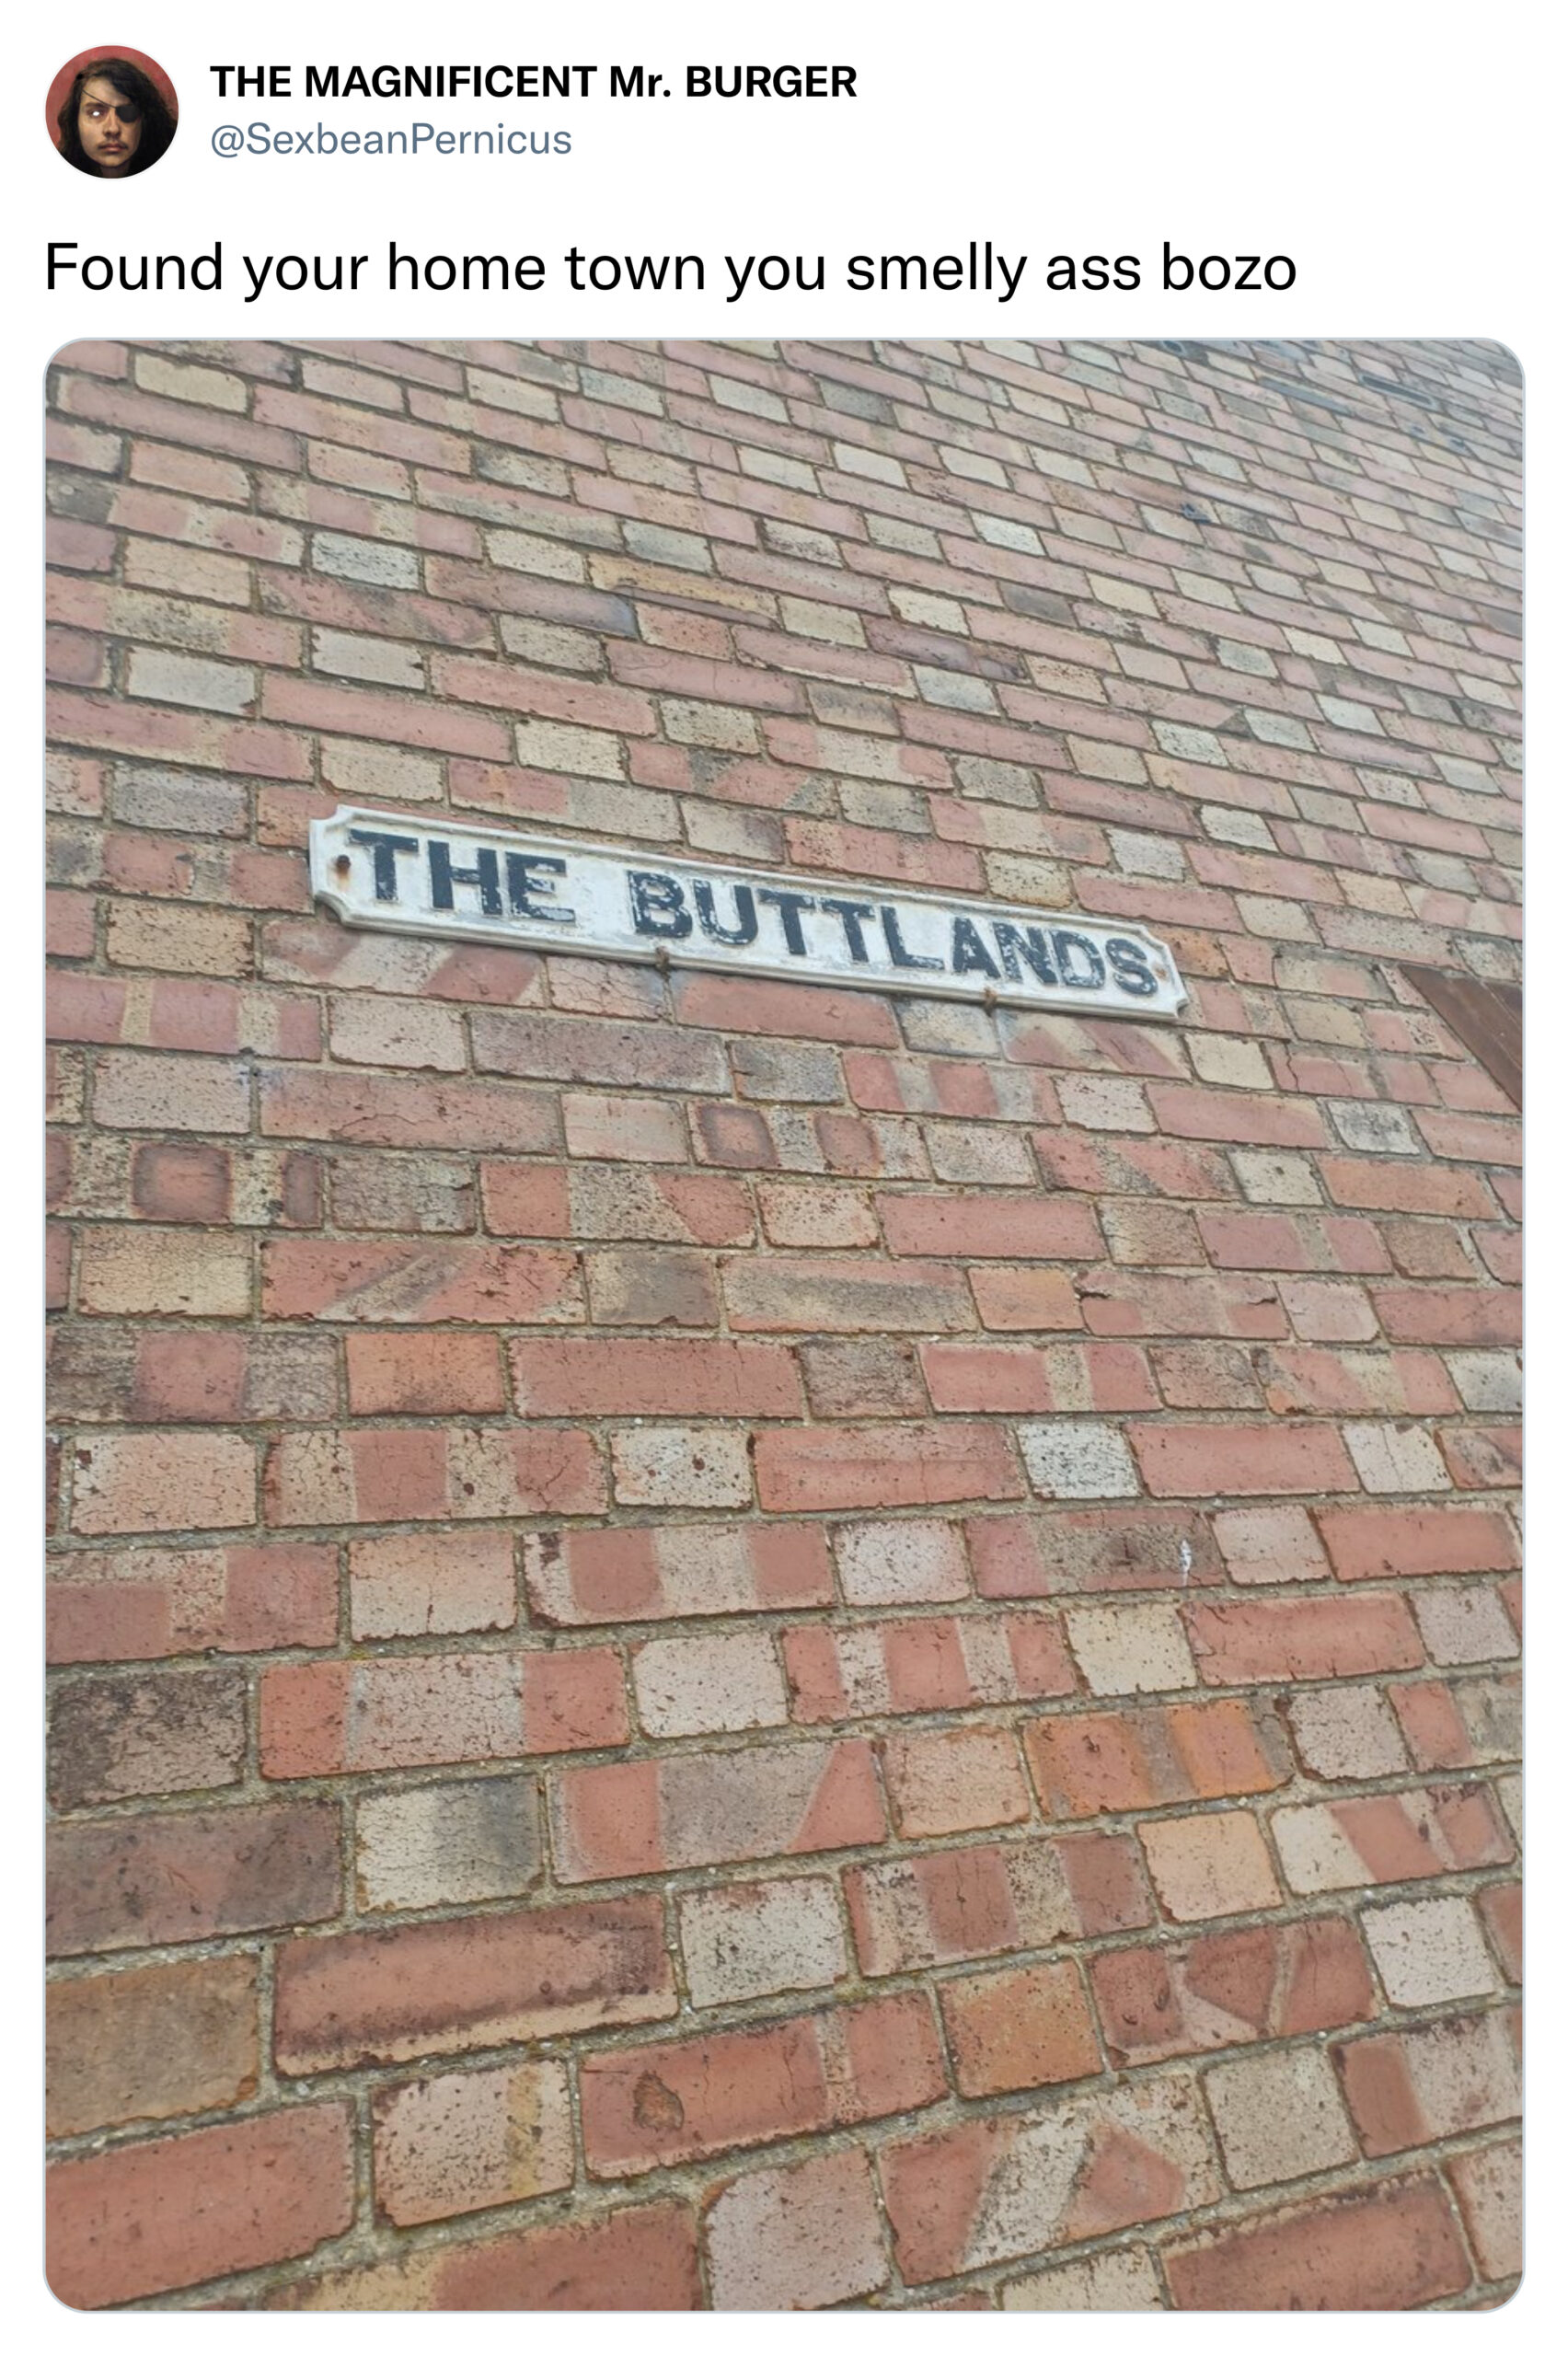 funny tweets and memes -  brickwork - The Magnificent Mr. Burger Found your home town you smelly ass bozo The Buttlands